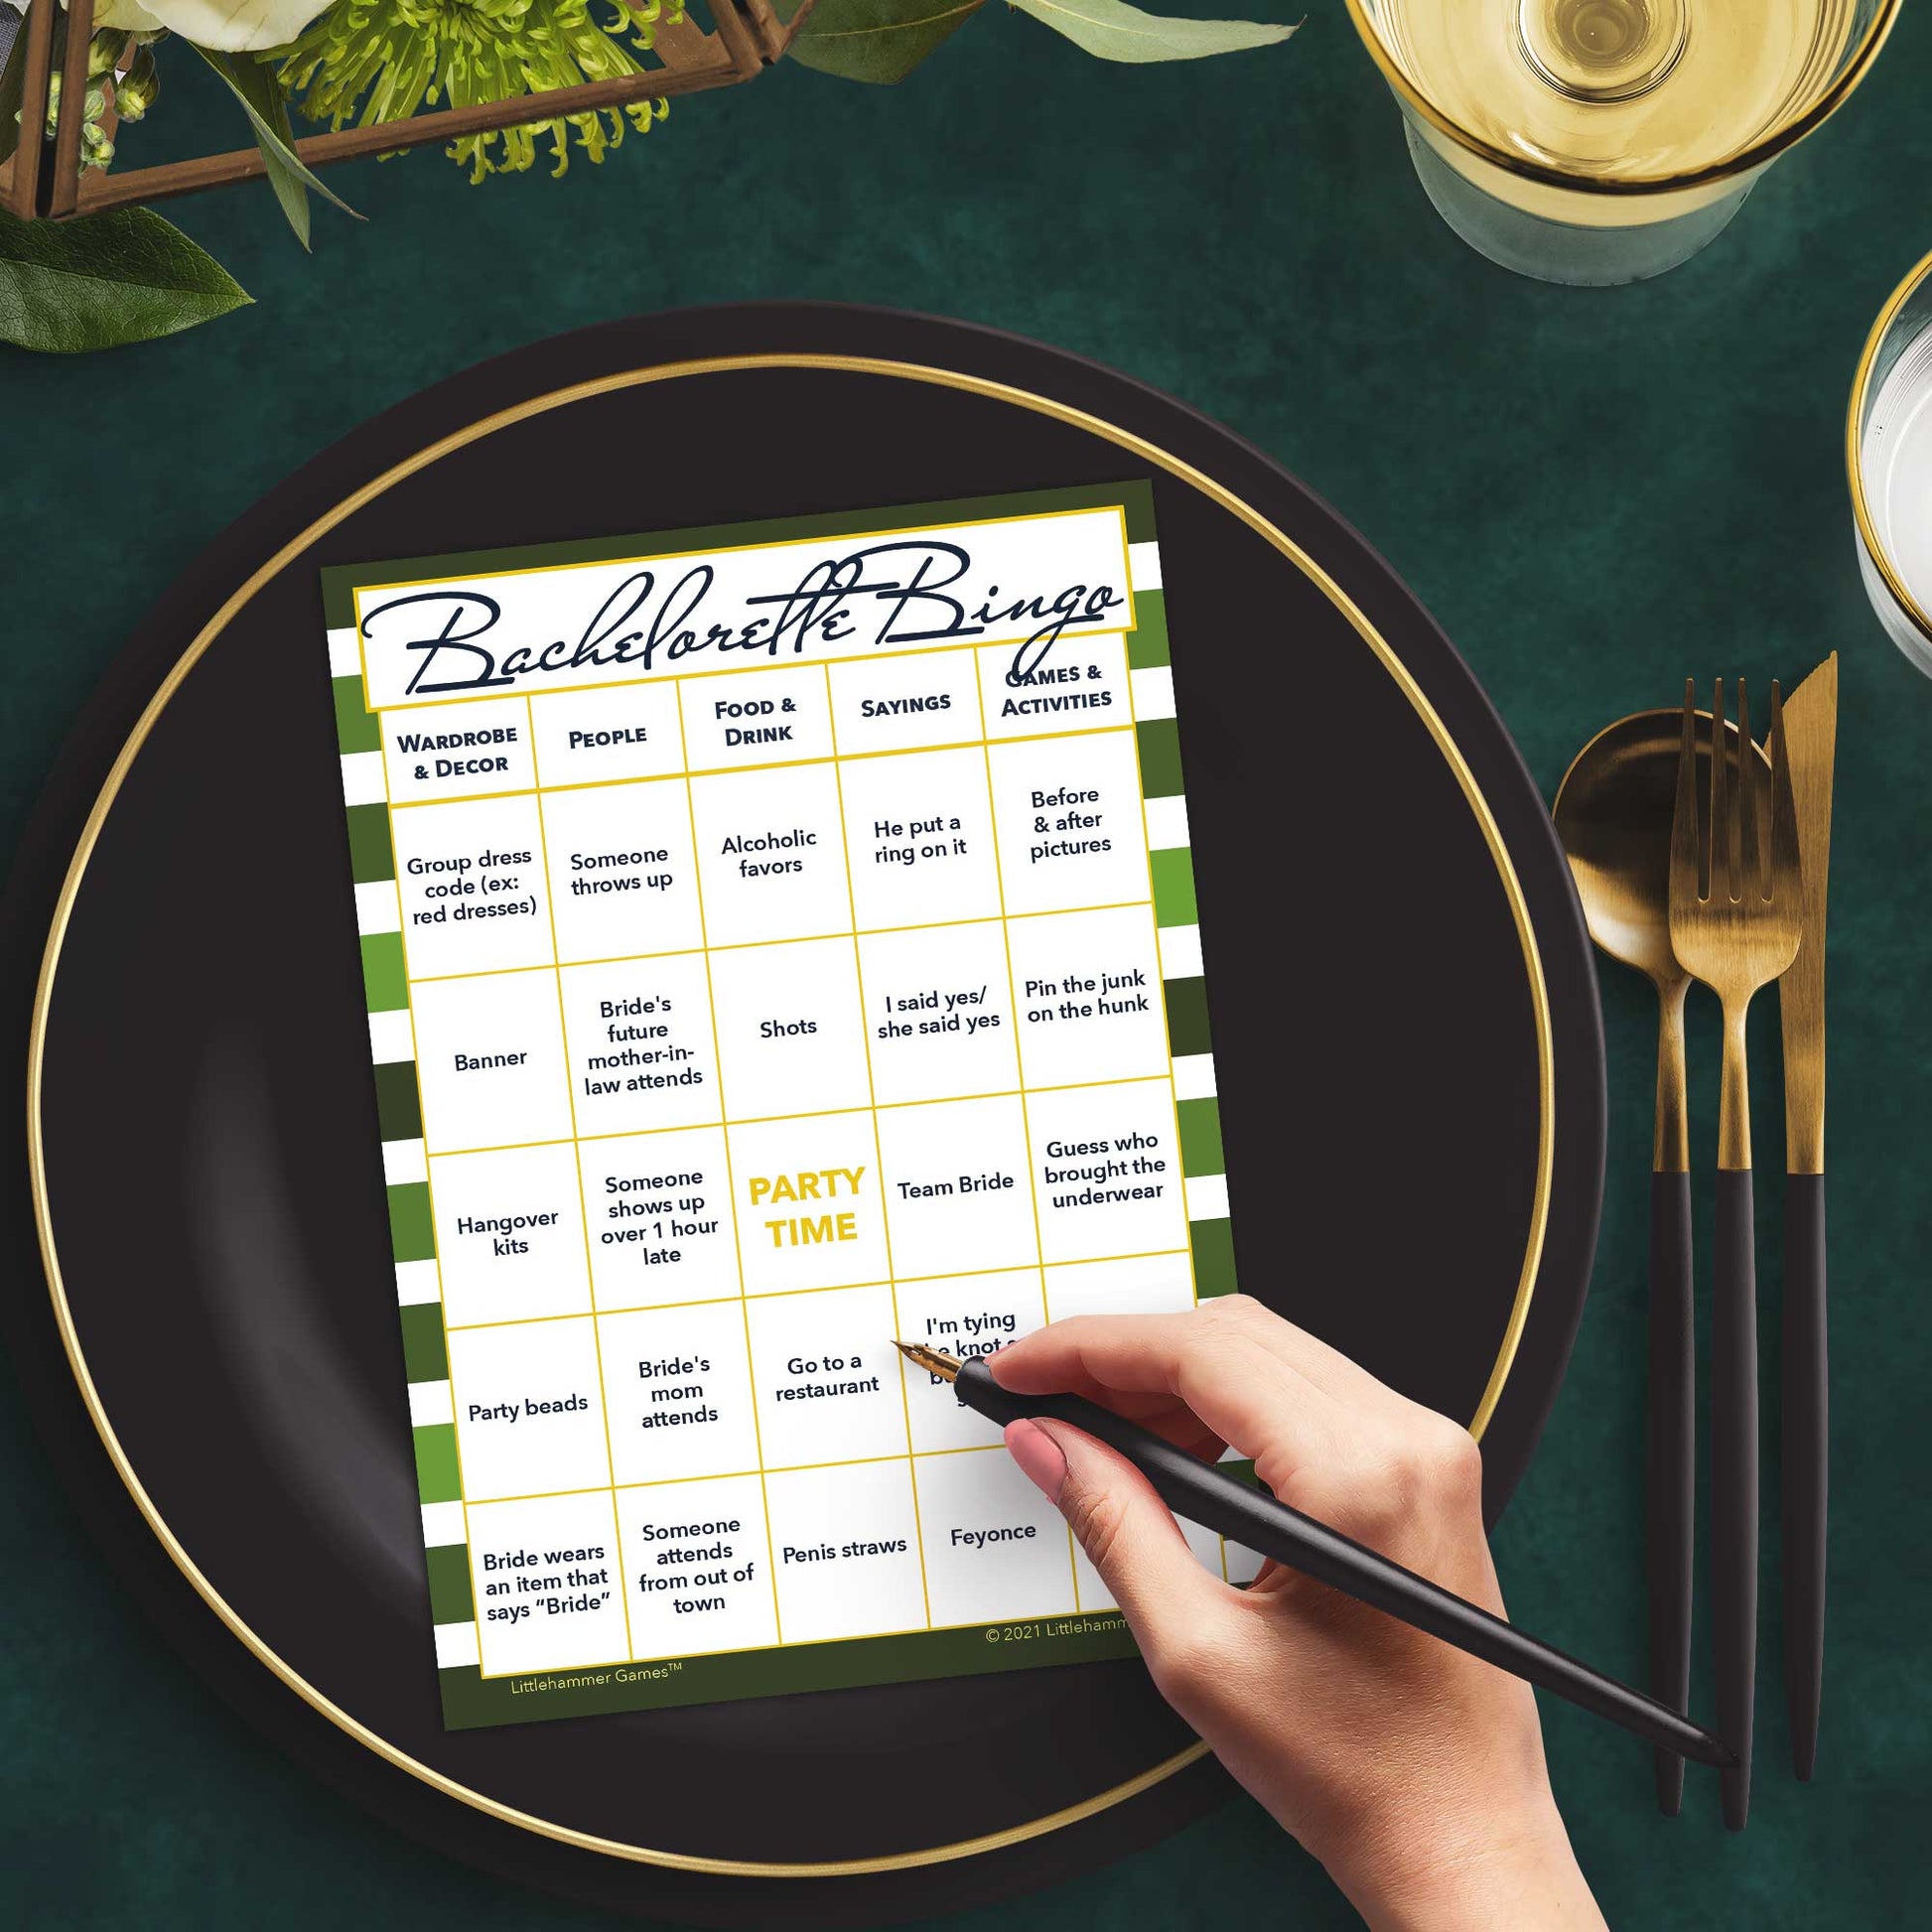 Woman with a pen sitting at a table with a green-striped Bachelorette Bingo game card on a gold and black plate on a dark place setting